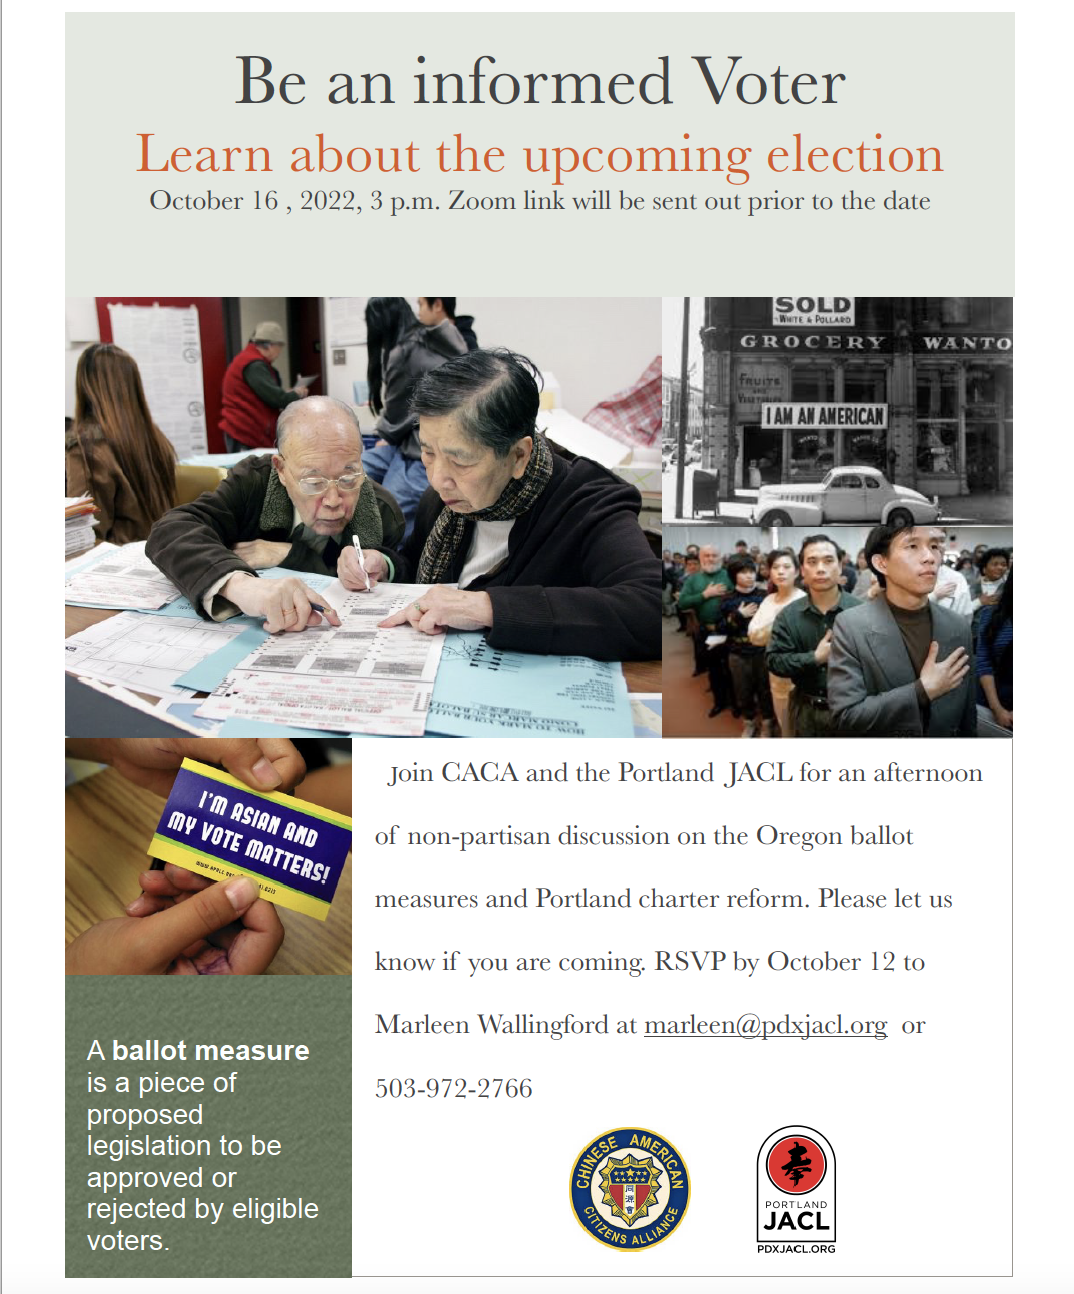  League of Women Voters Information Session with CACA